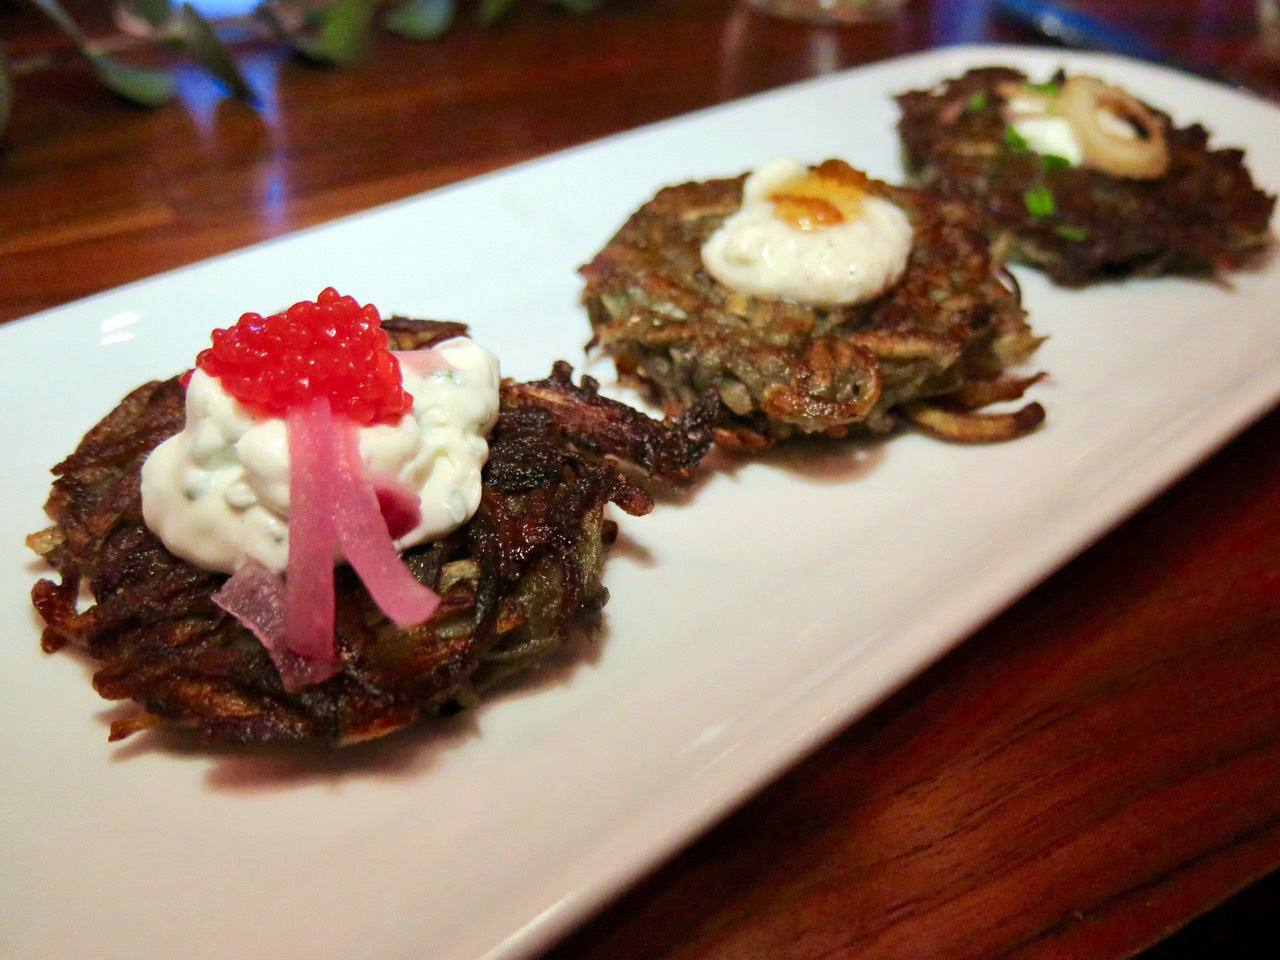 The trio of latkes featured cannabis leaves as an herbaceous note.